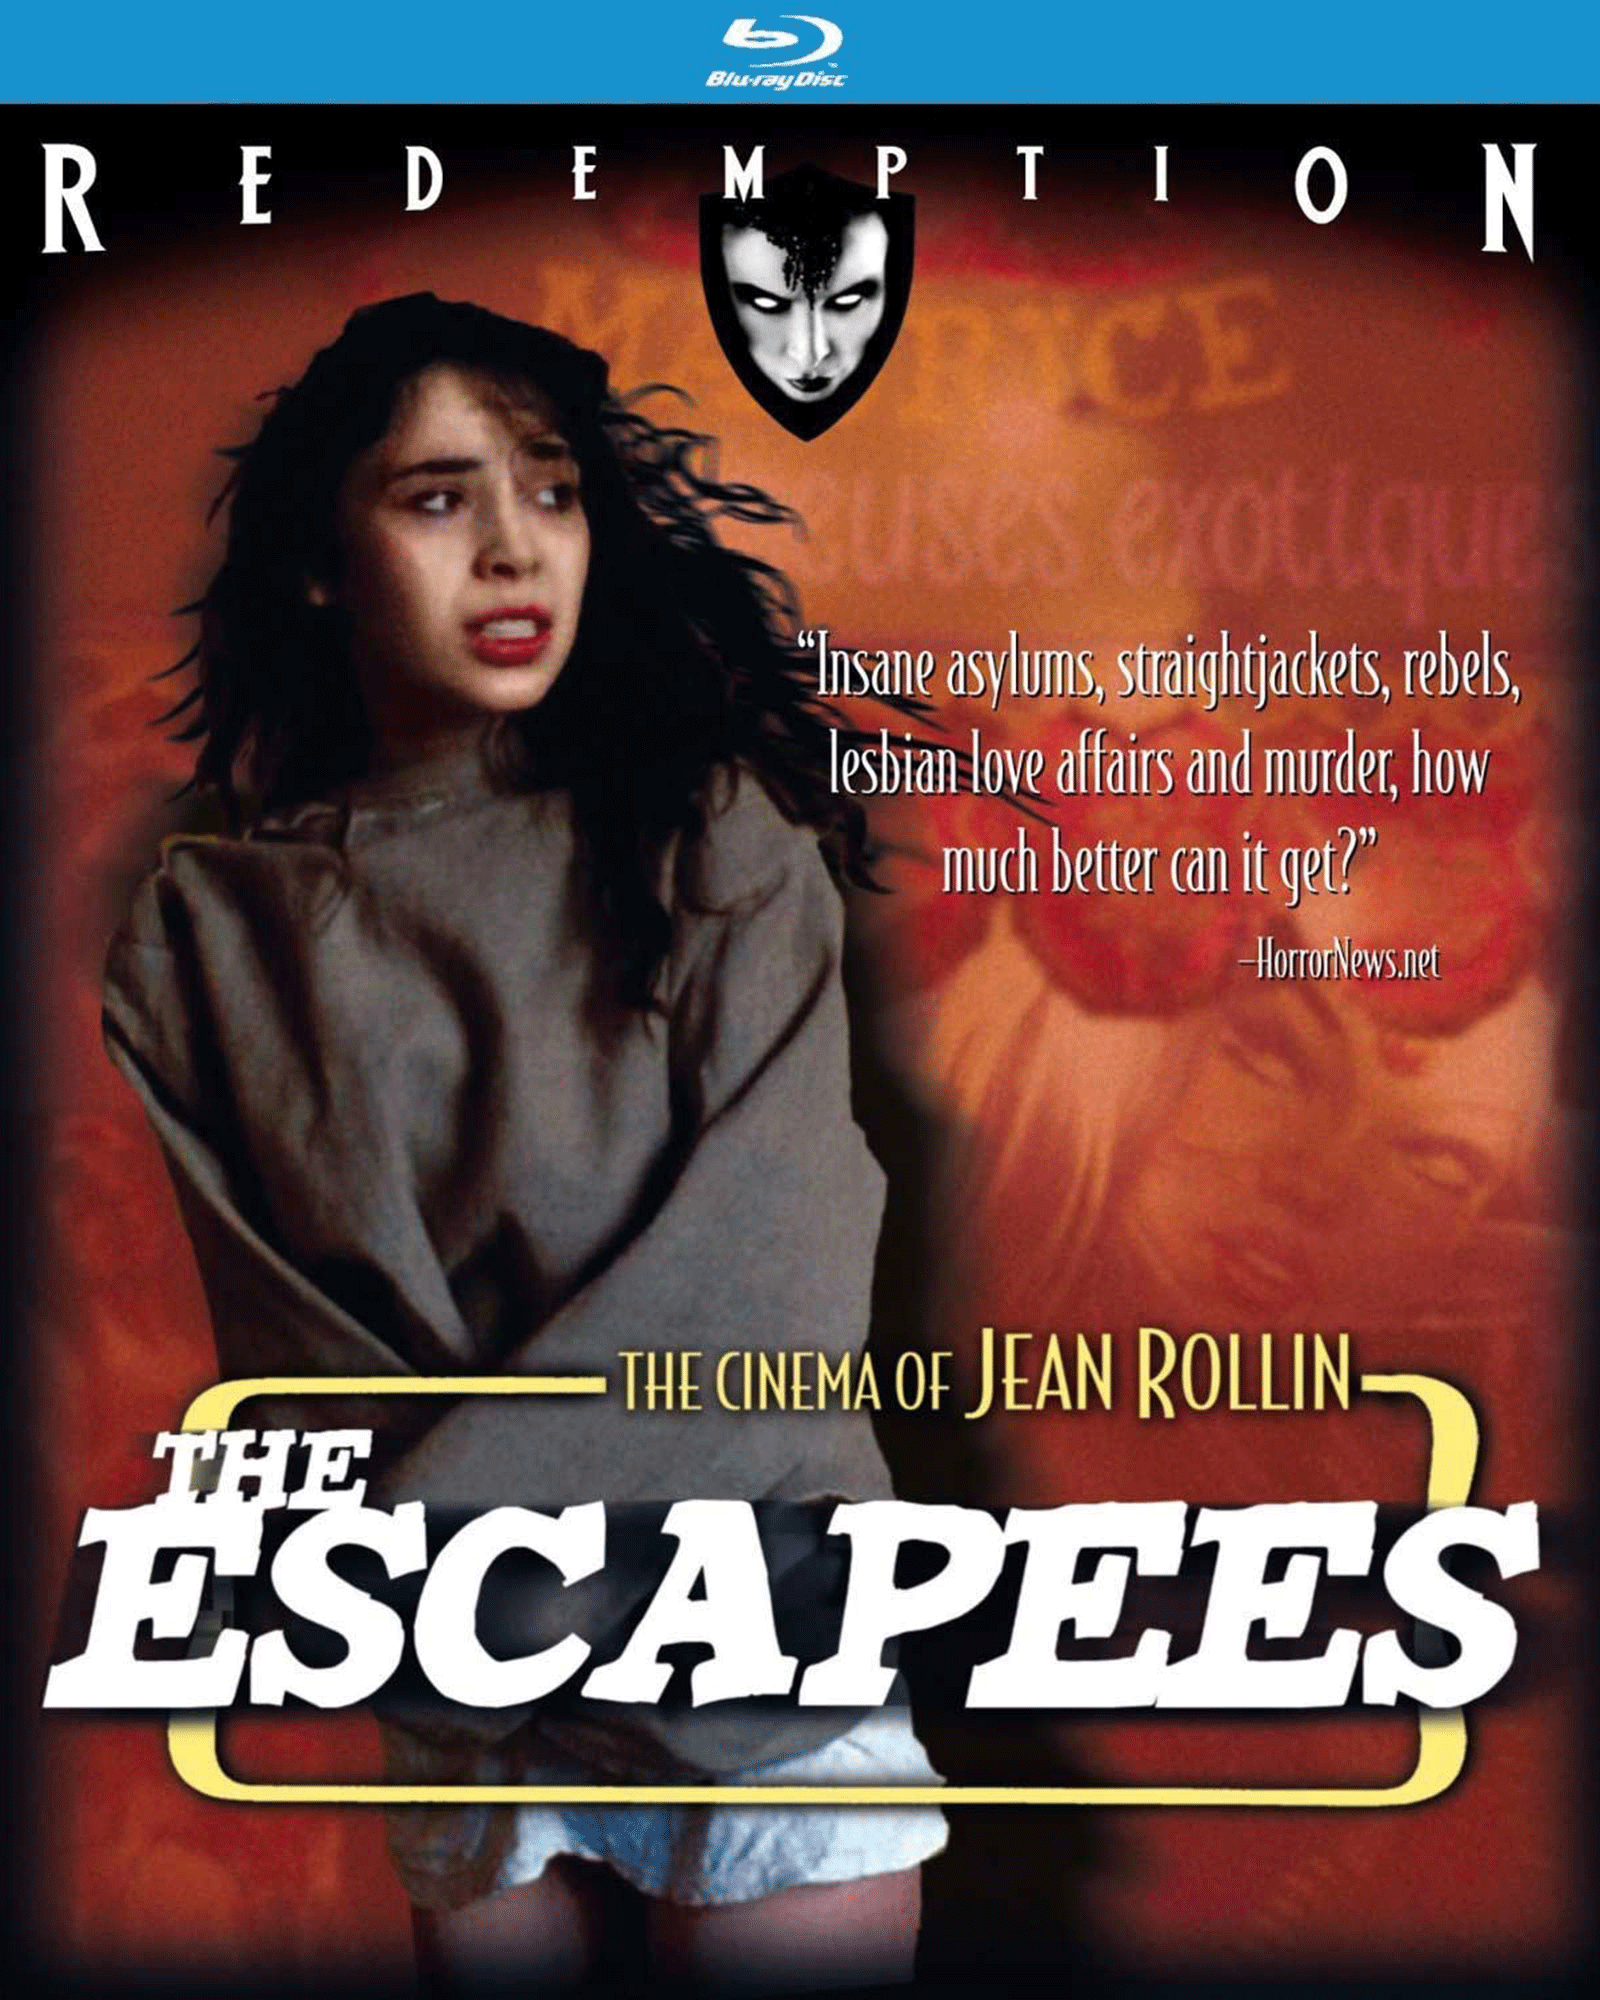 THE ESCAPEES BLU-RAY